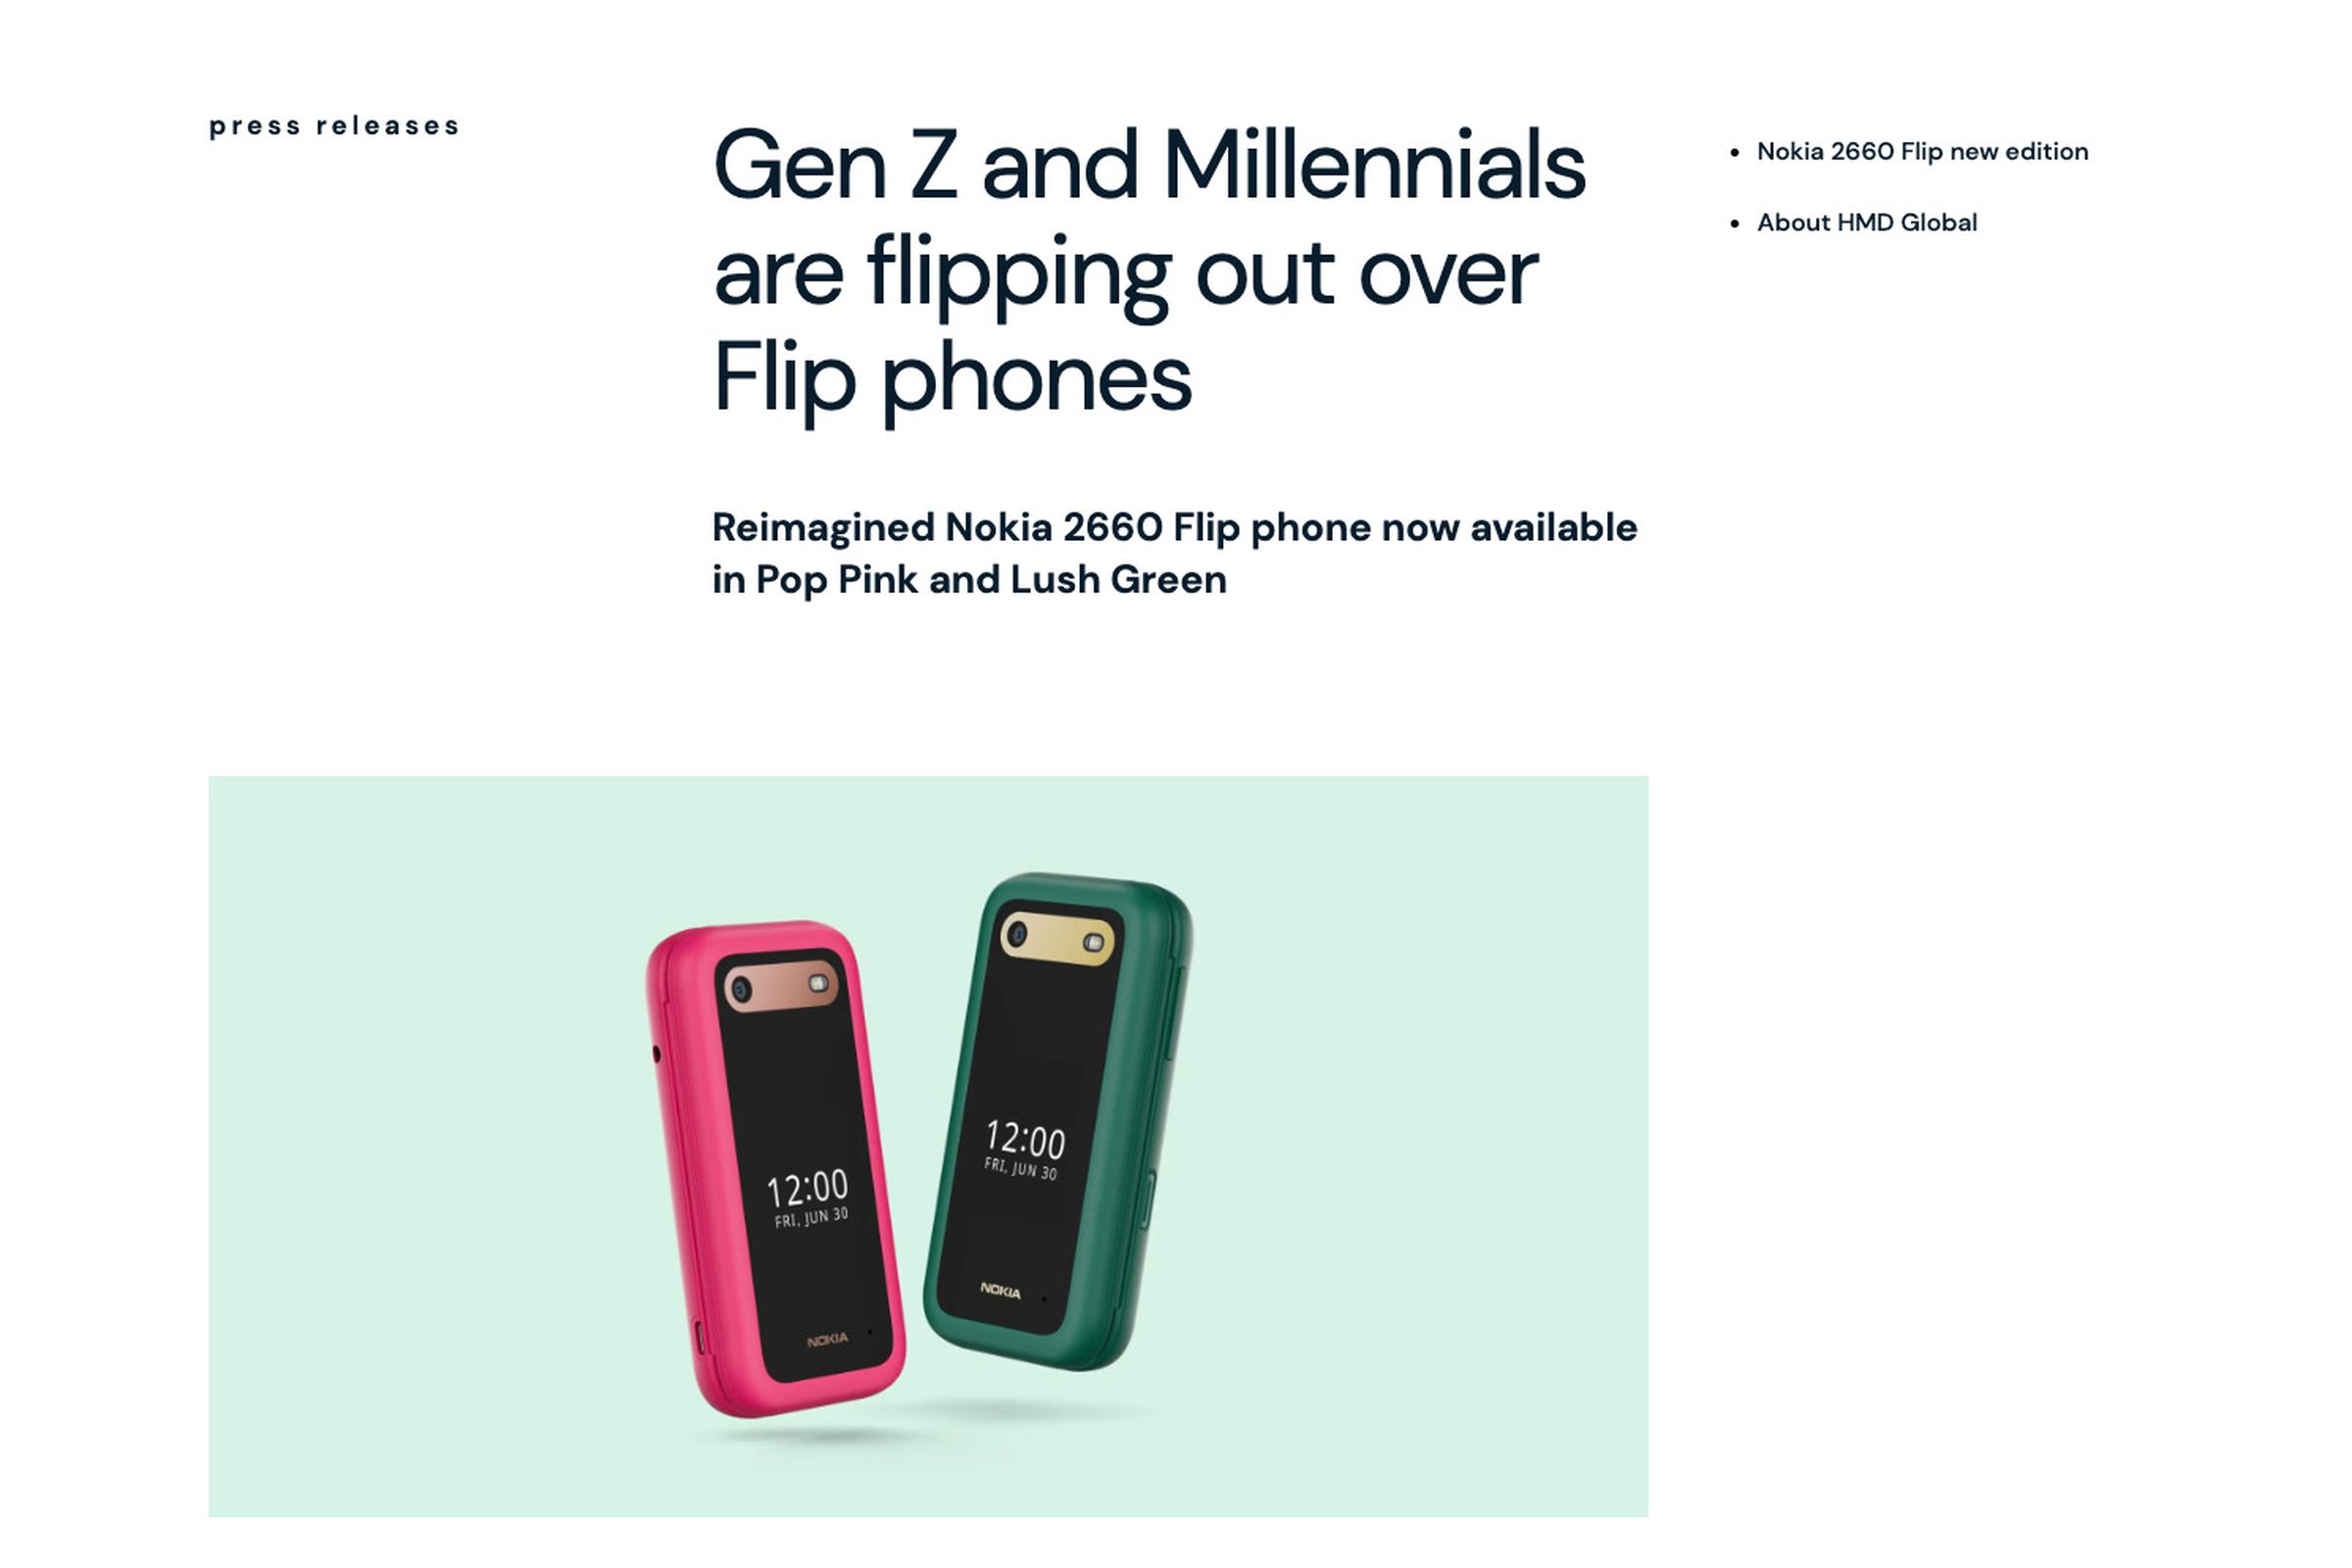 A screenshot of a press release headline stating “Gen Z and Millennials are flipping out over Flip phones.”